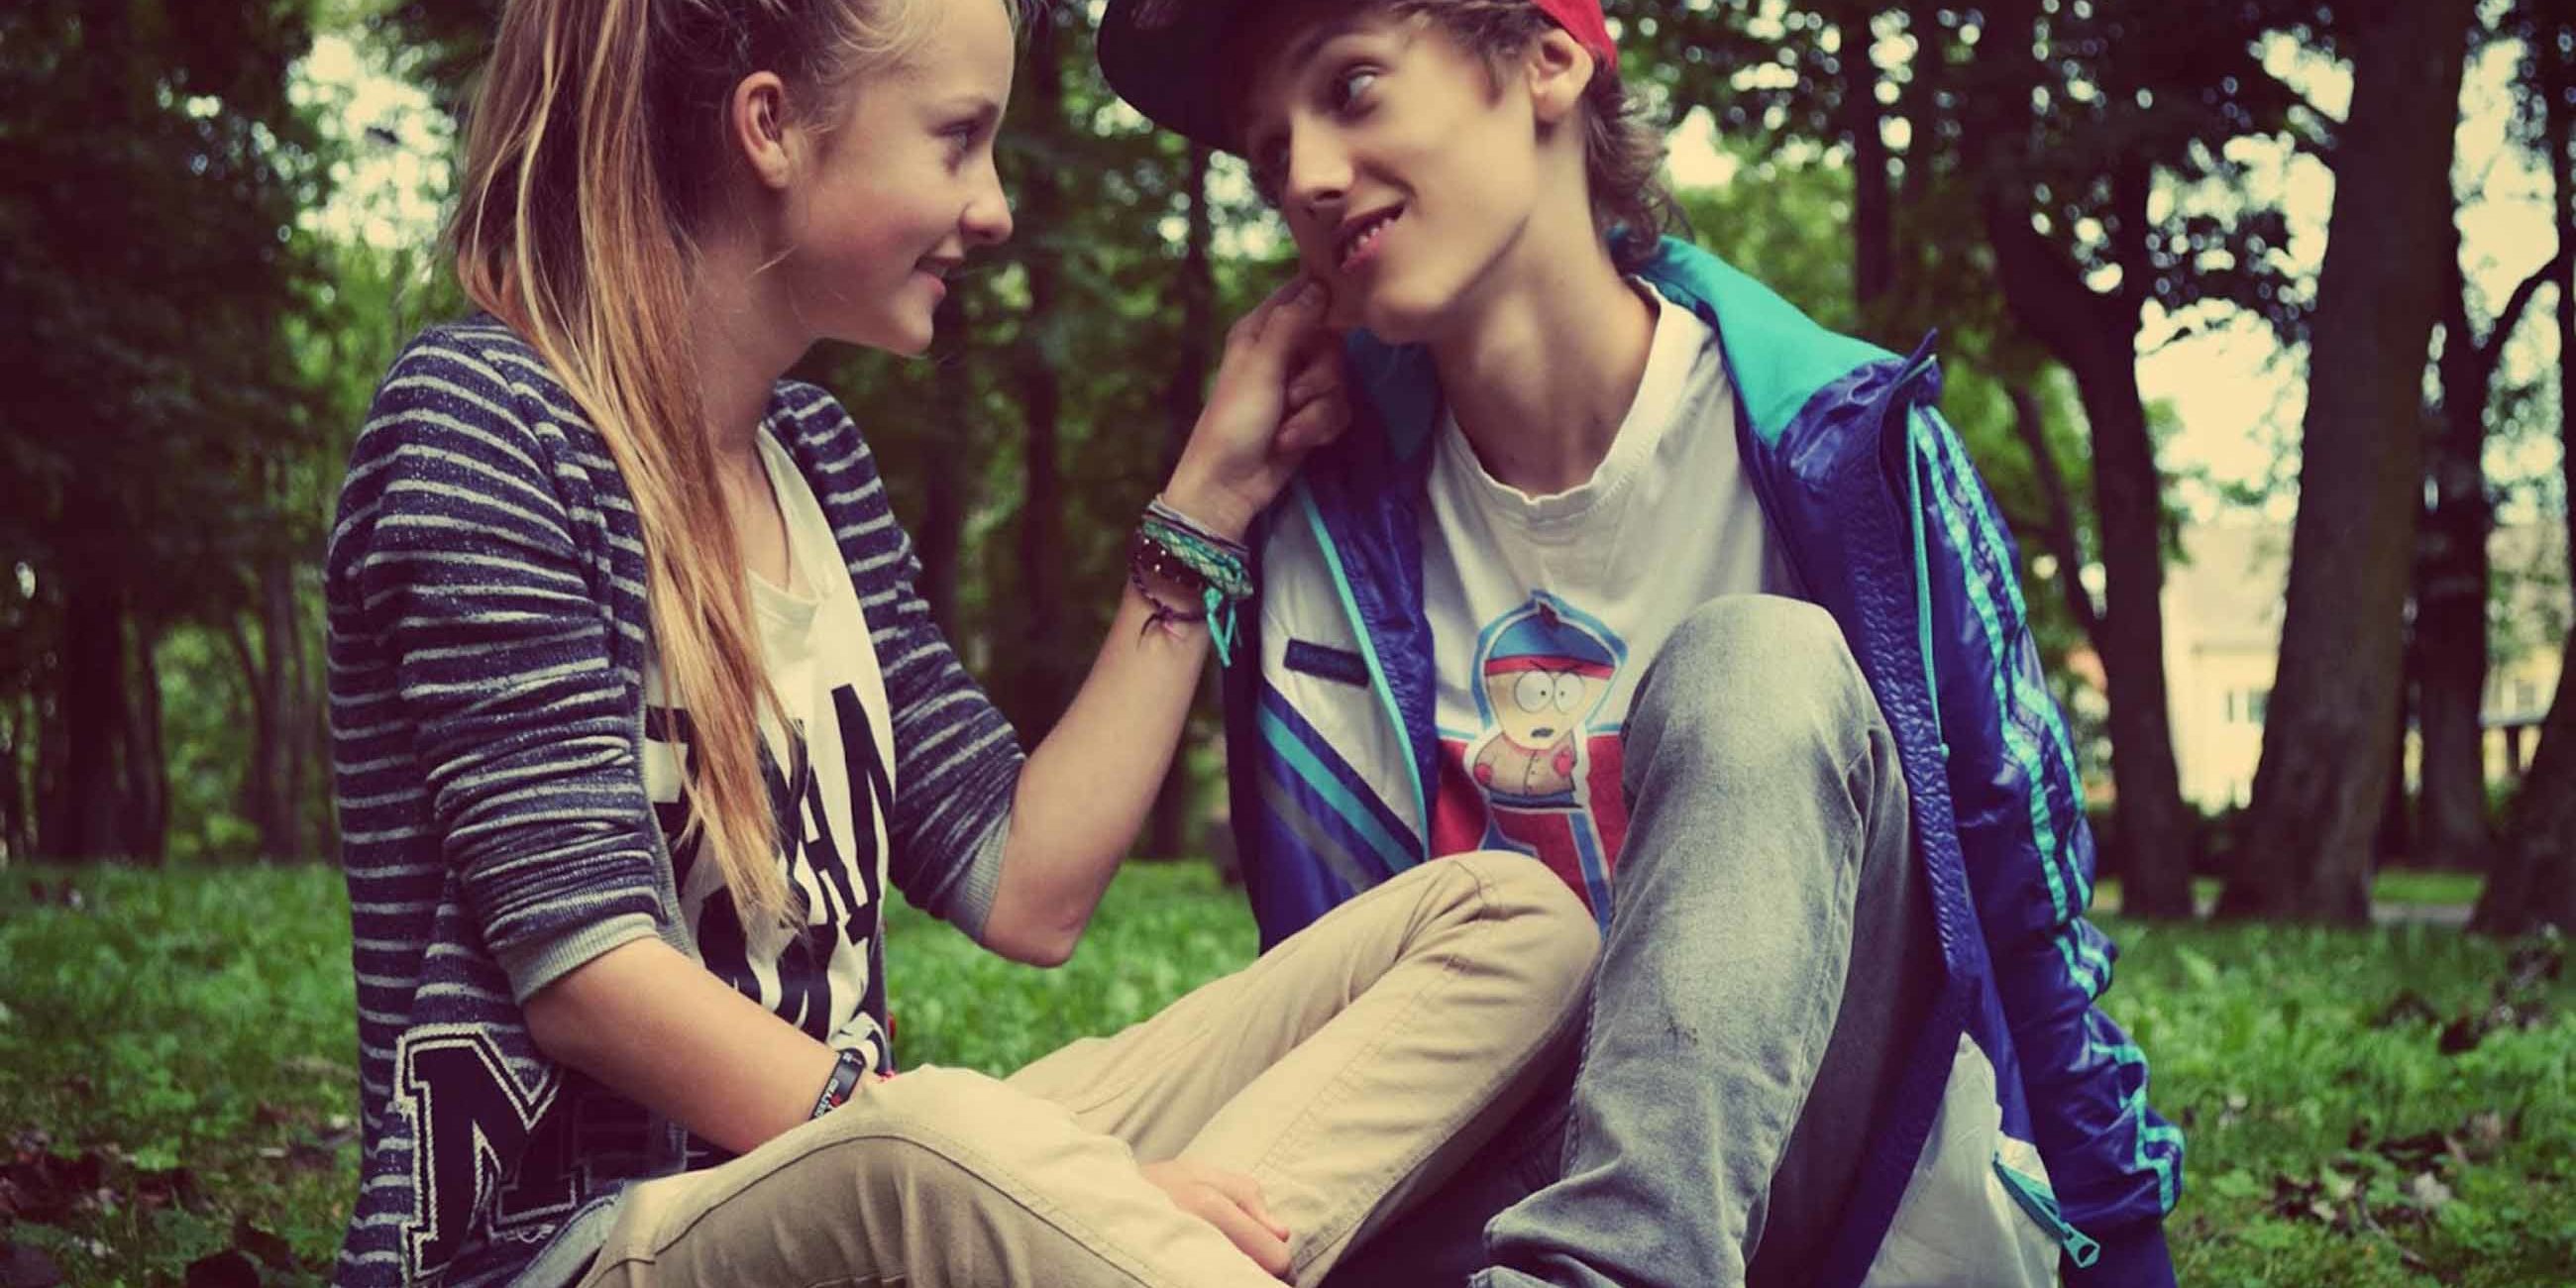 Teen-couple-very-romantic-love-images-free-for-desktop.